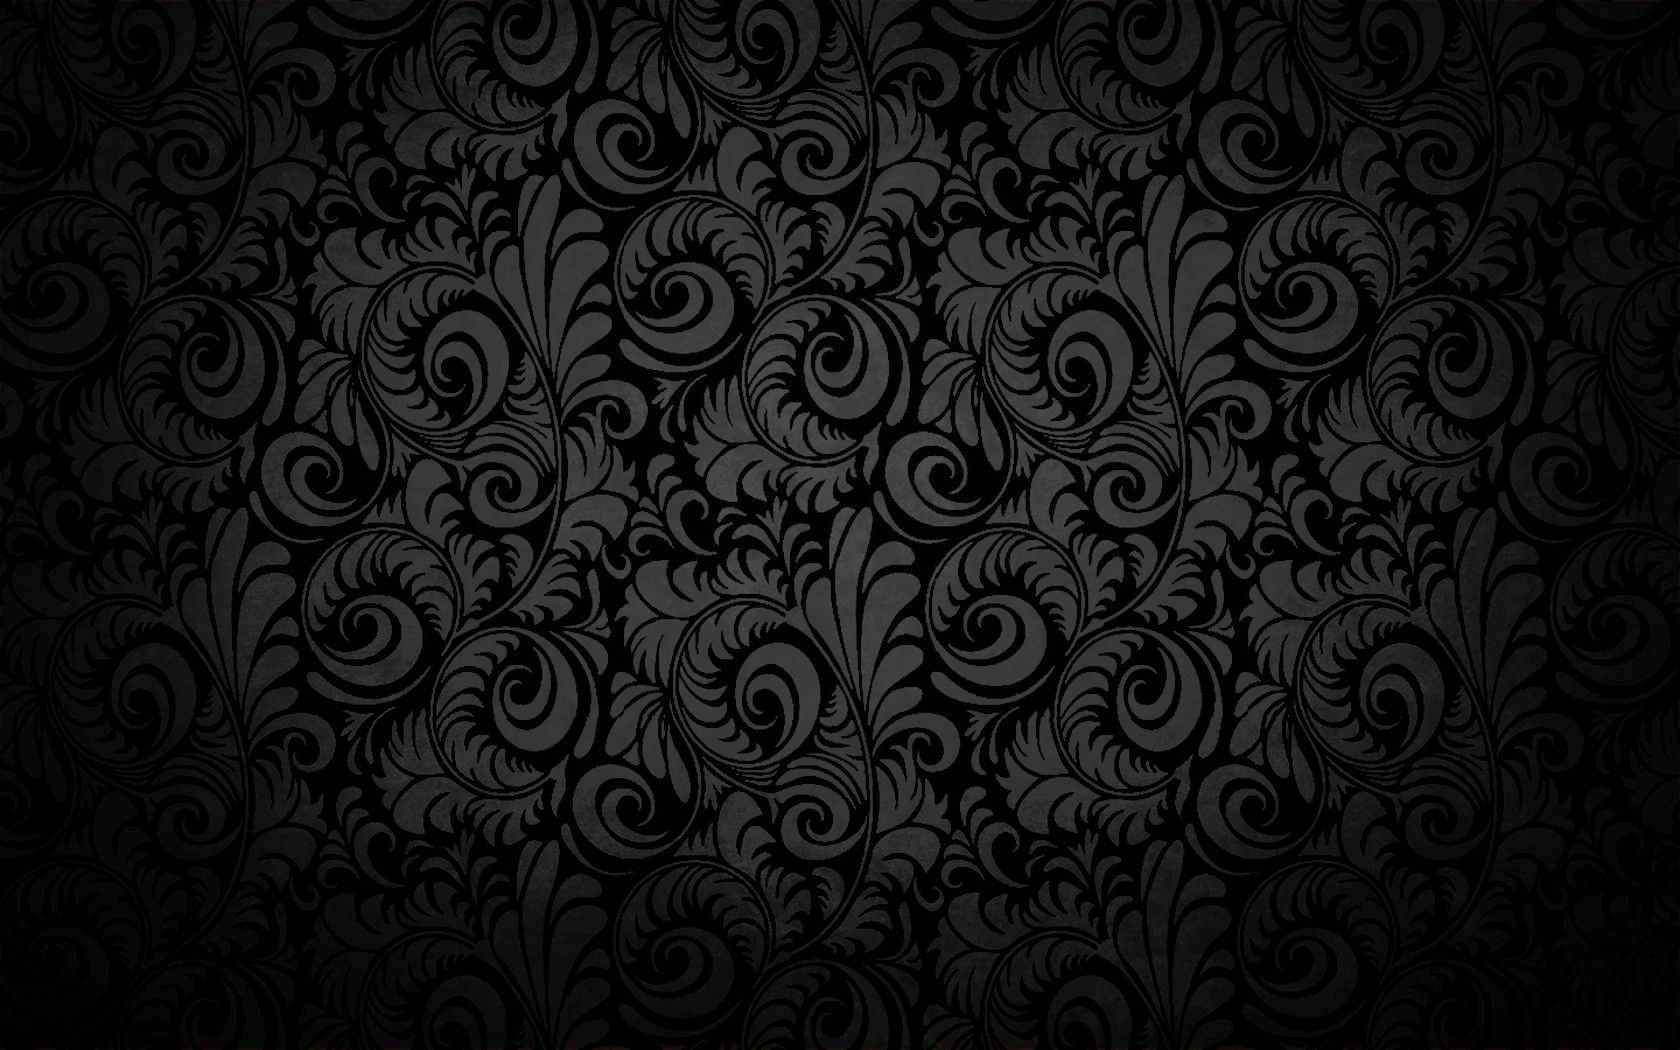 10+ images about Wallpaper Patterns on Pinterest | Wallpaper